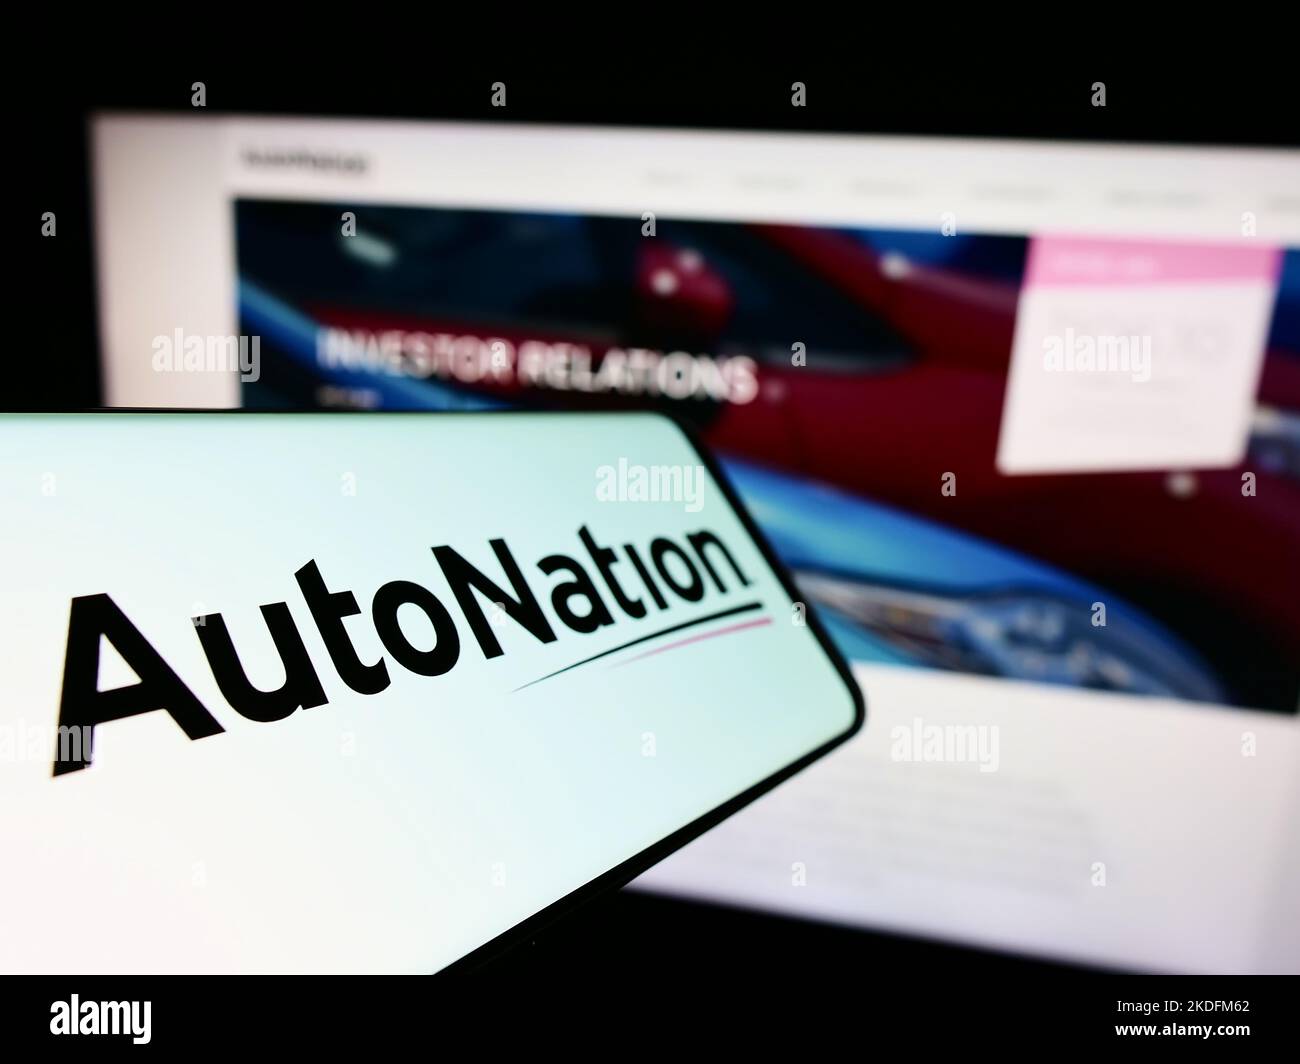 Cellphone with logo of American automotive retail company AutoNation Inc. on screen in front of business website. Focus on left of phone display. Stock Photo